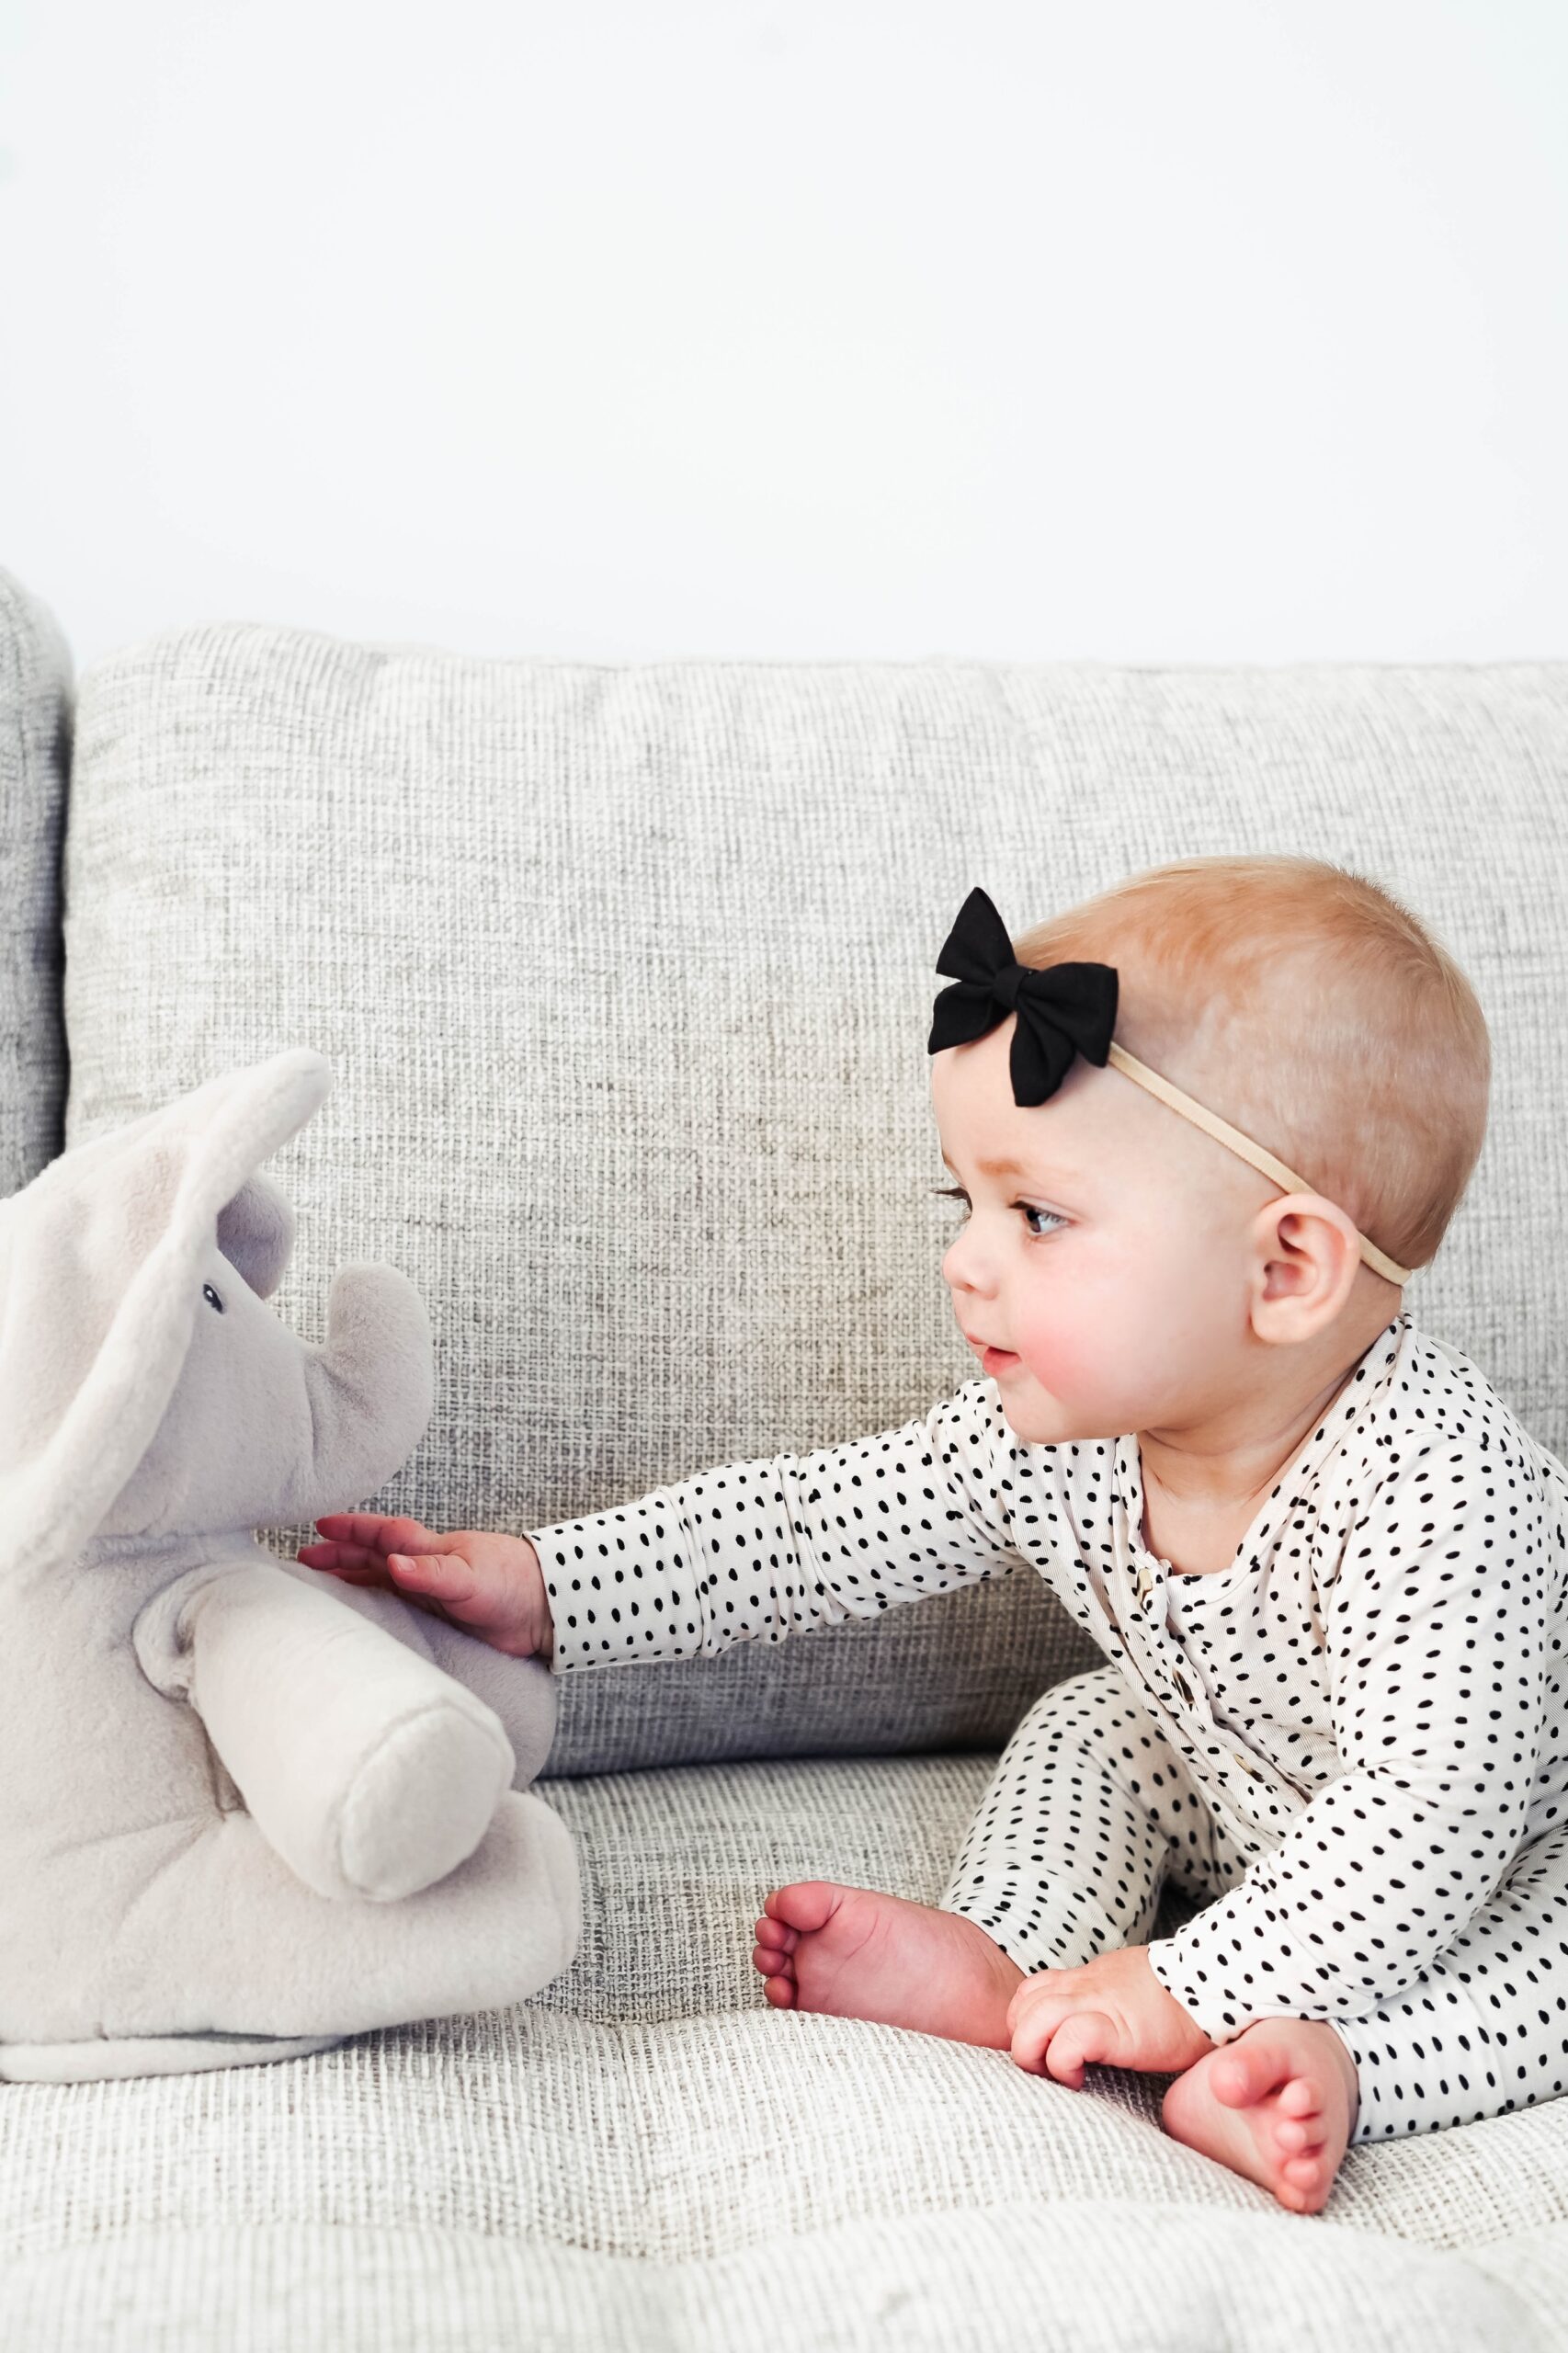 When Do Babies Start Playing With Toys? A Guide for 0-12 Months